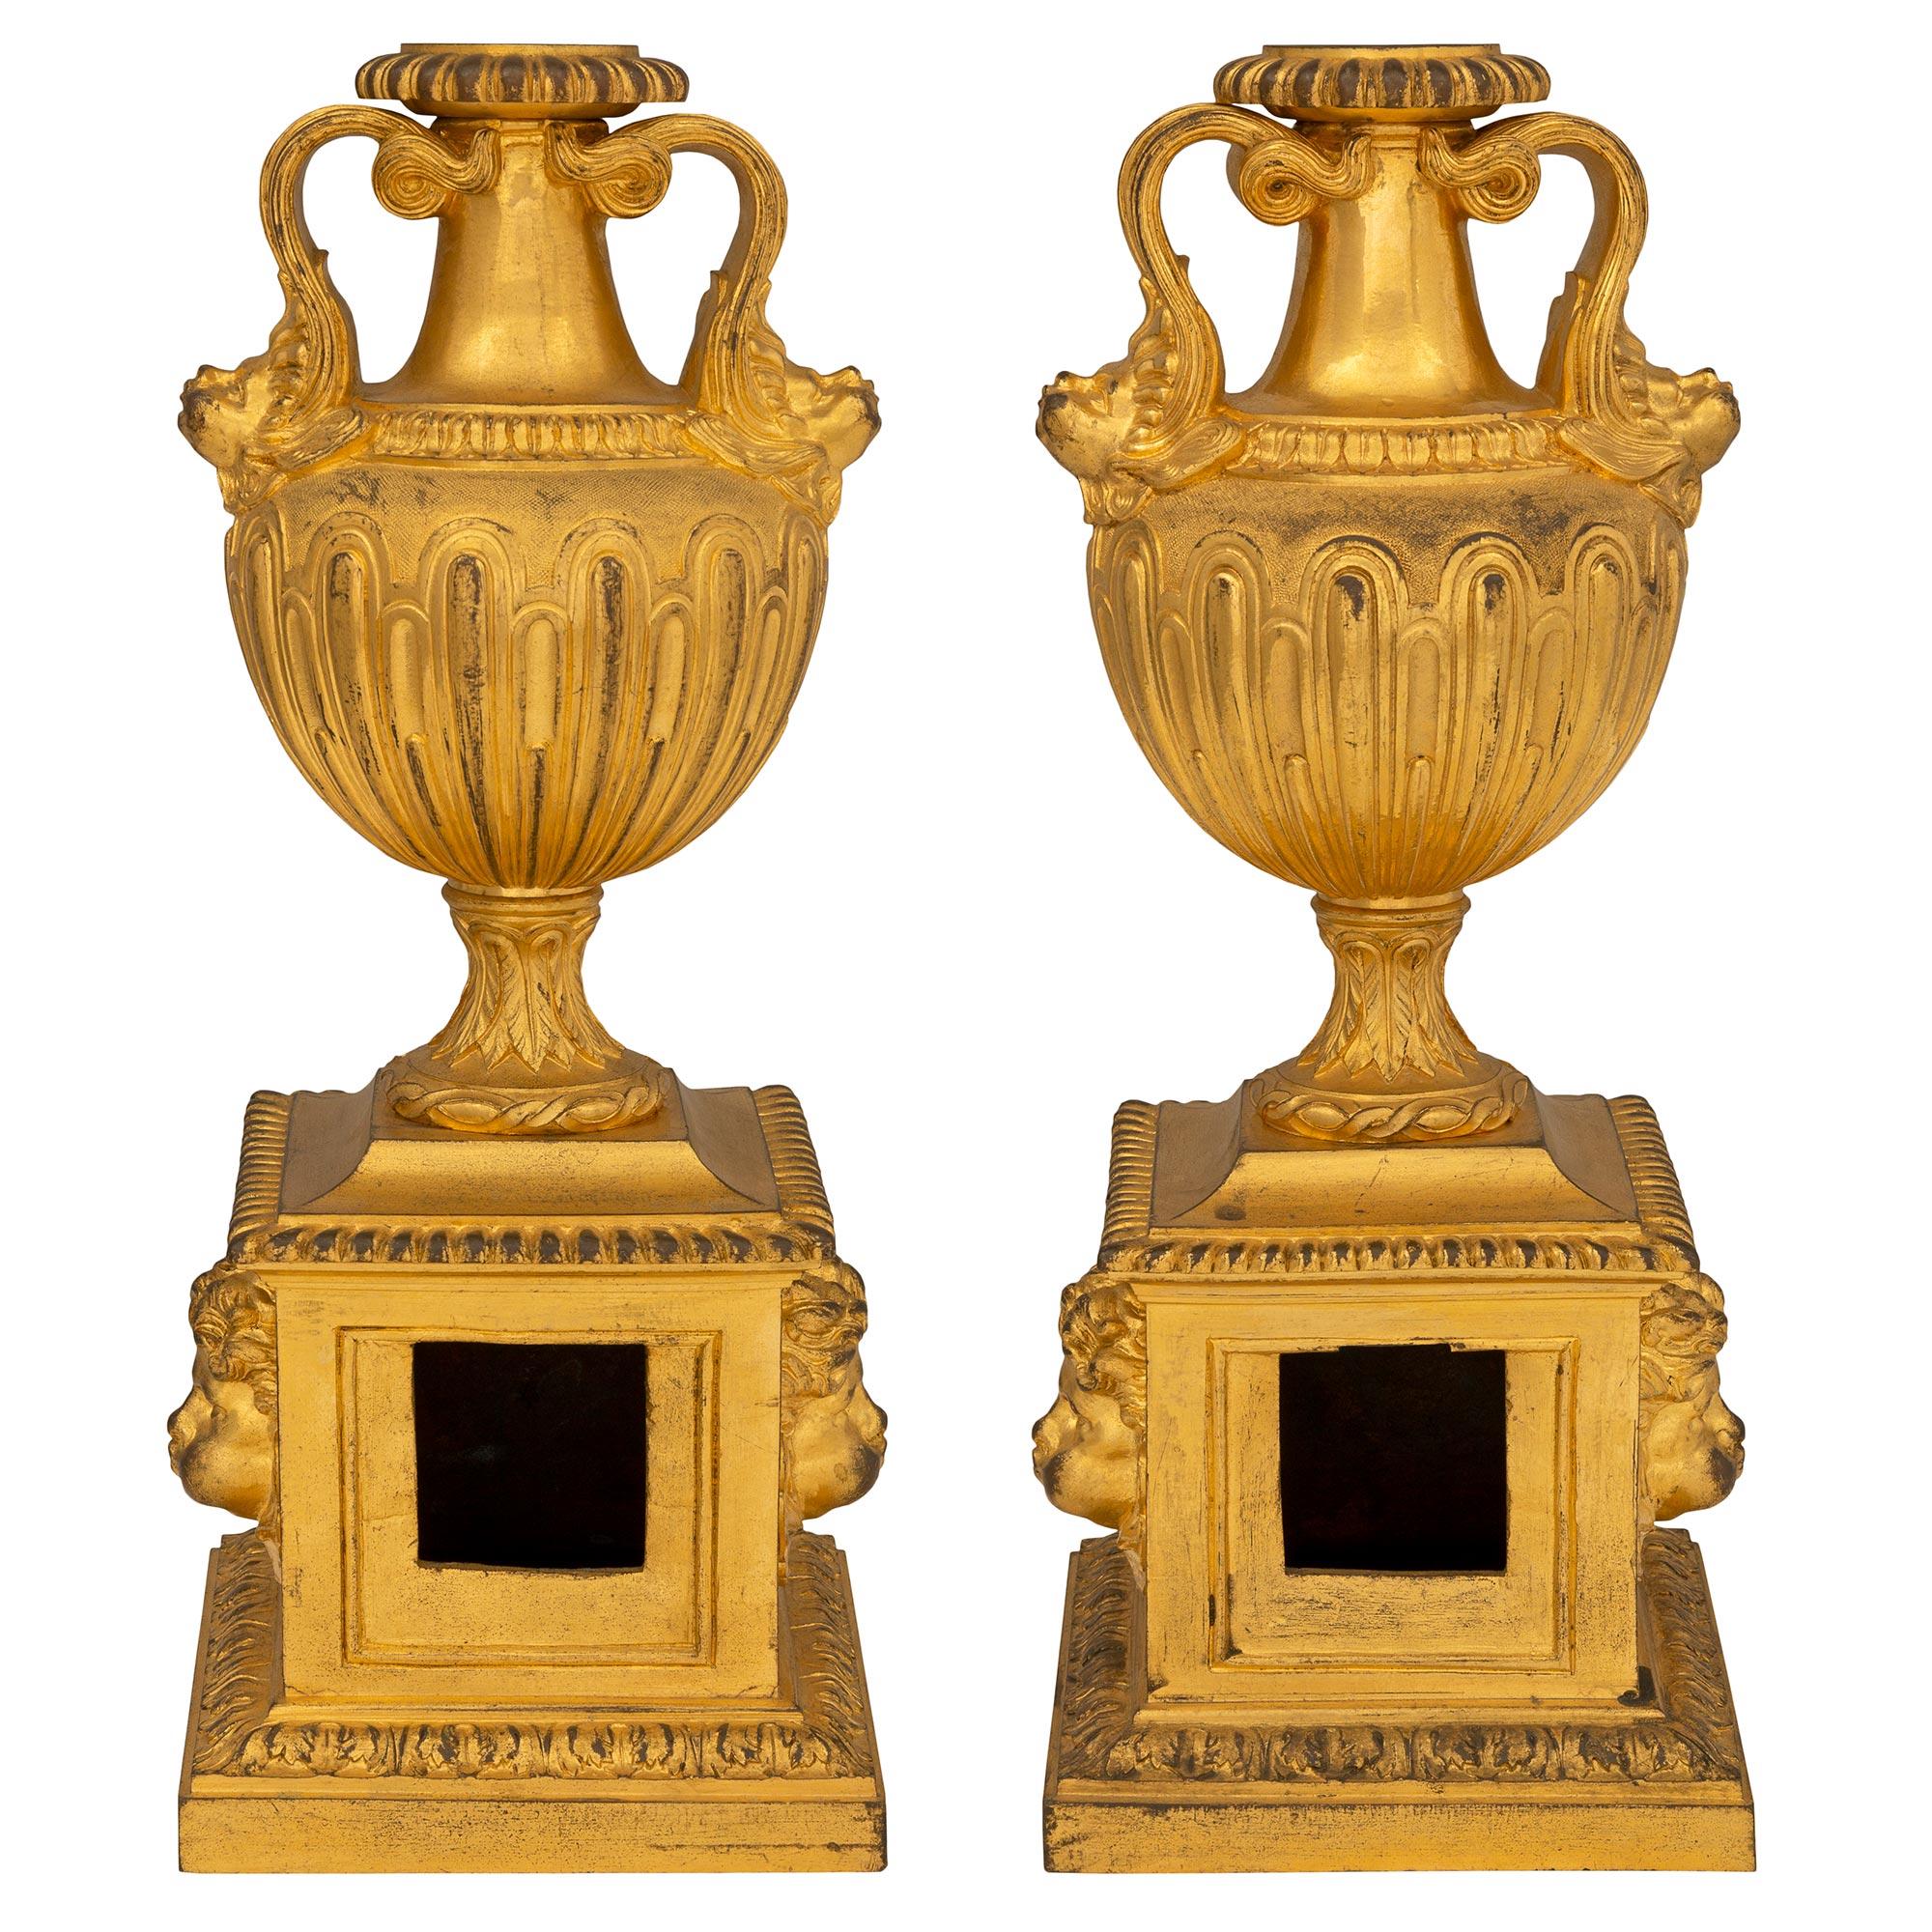 A most elegant pair of French 18th century Louis XVI period ormolu fireplace Chenets/andirons. Each Chenet is raised by a square base with a wrap around acanthus leaf border. At the center are three charming and richly chased faces of Zephyrus, the